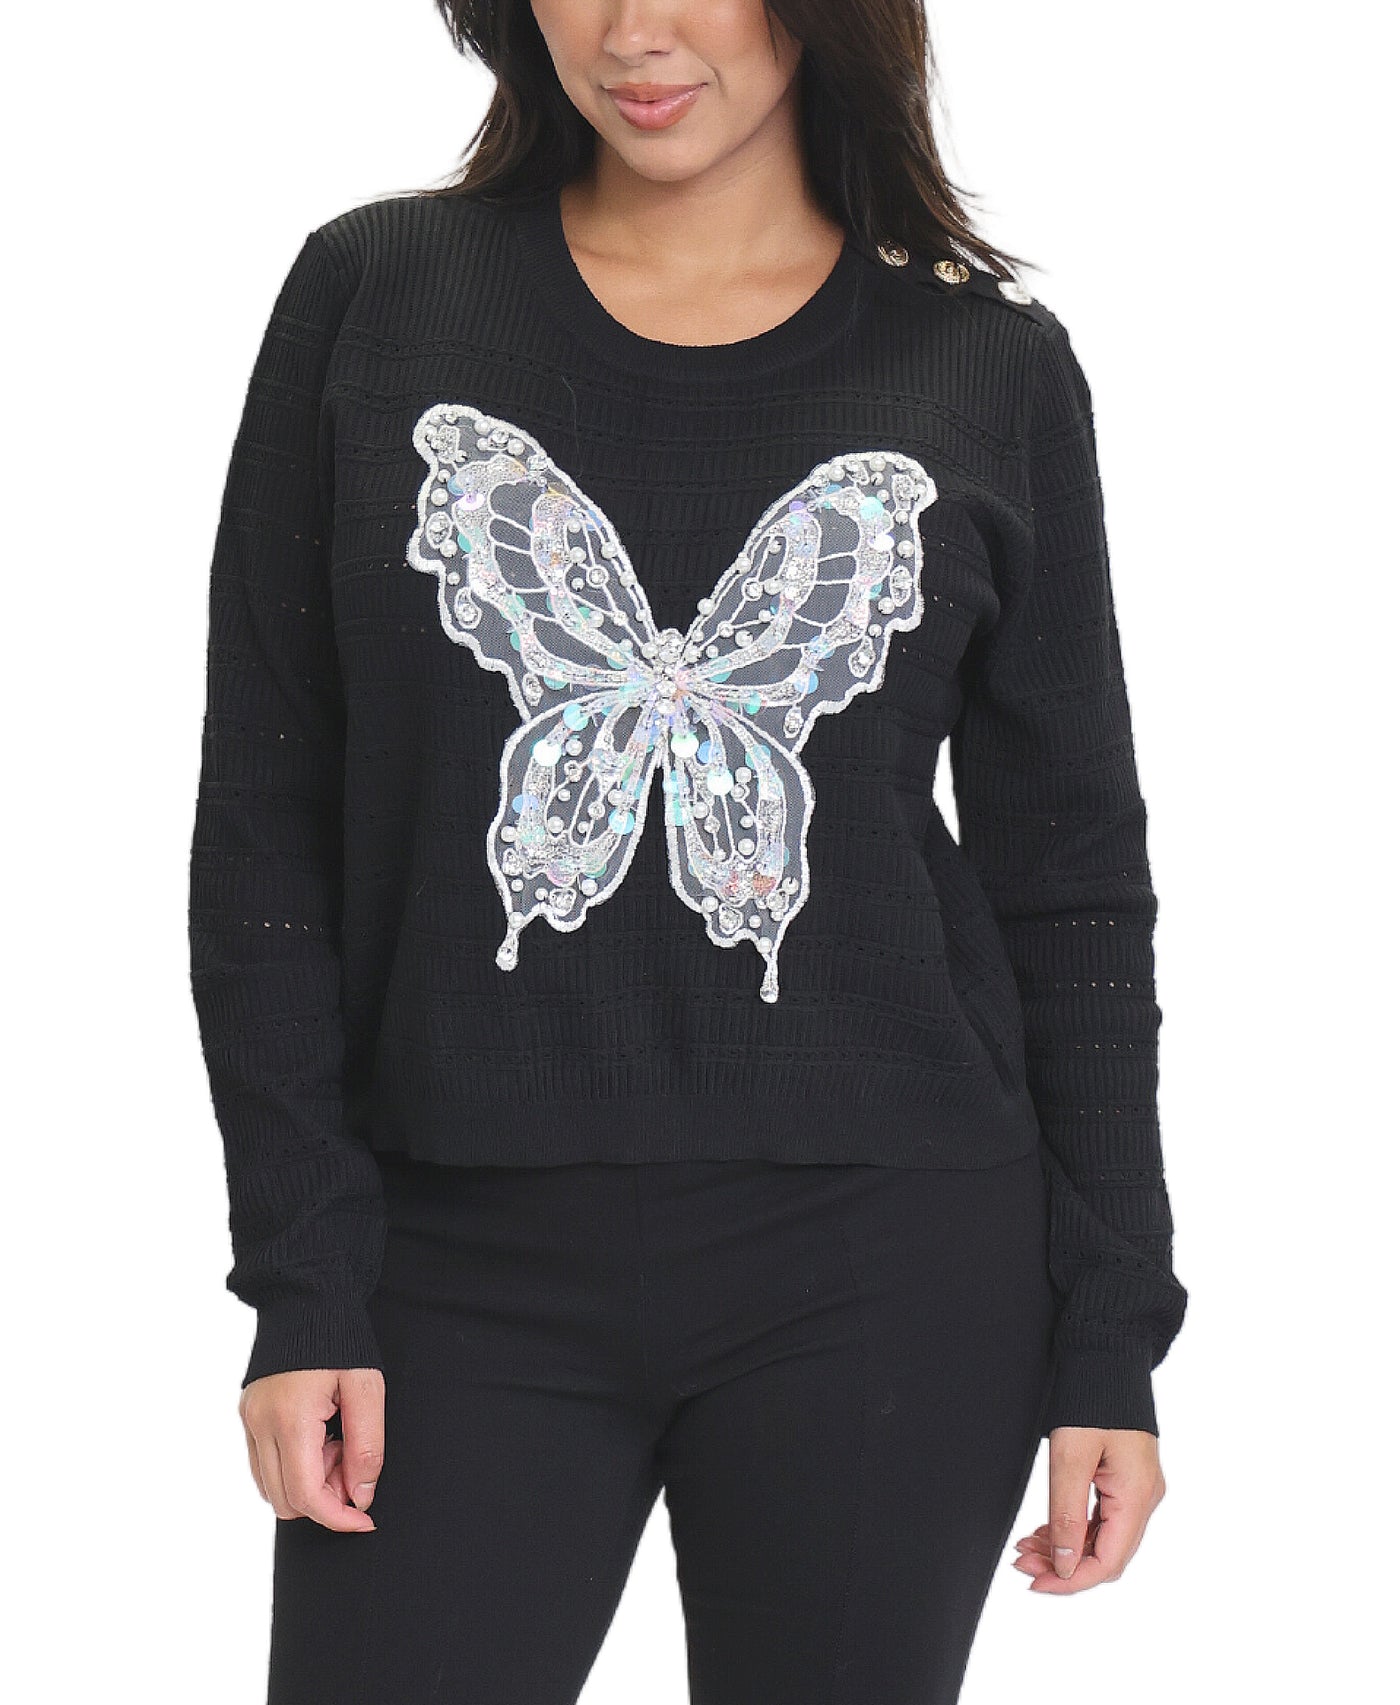 Pointelle Knit Top w/ Sequin Butterfly image 1